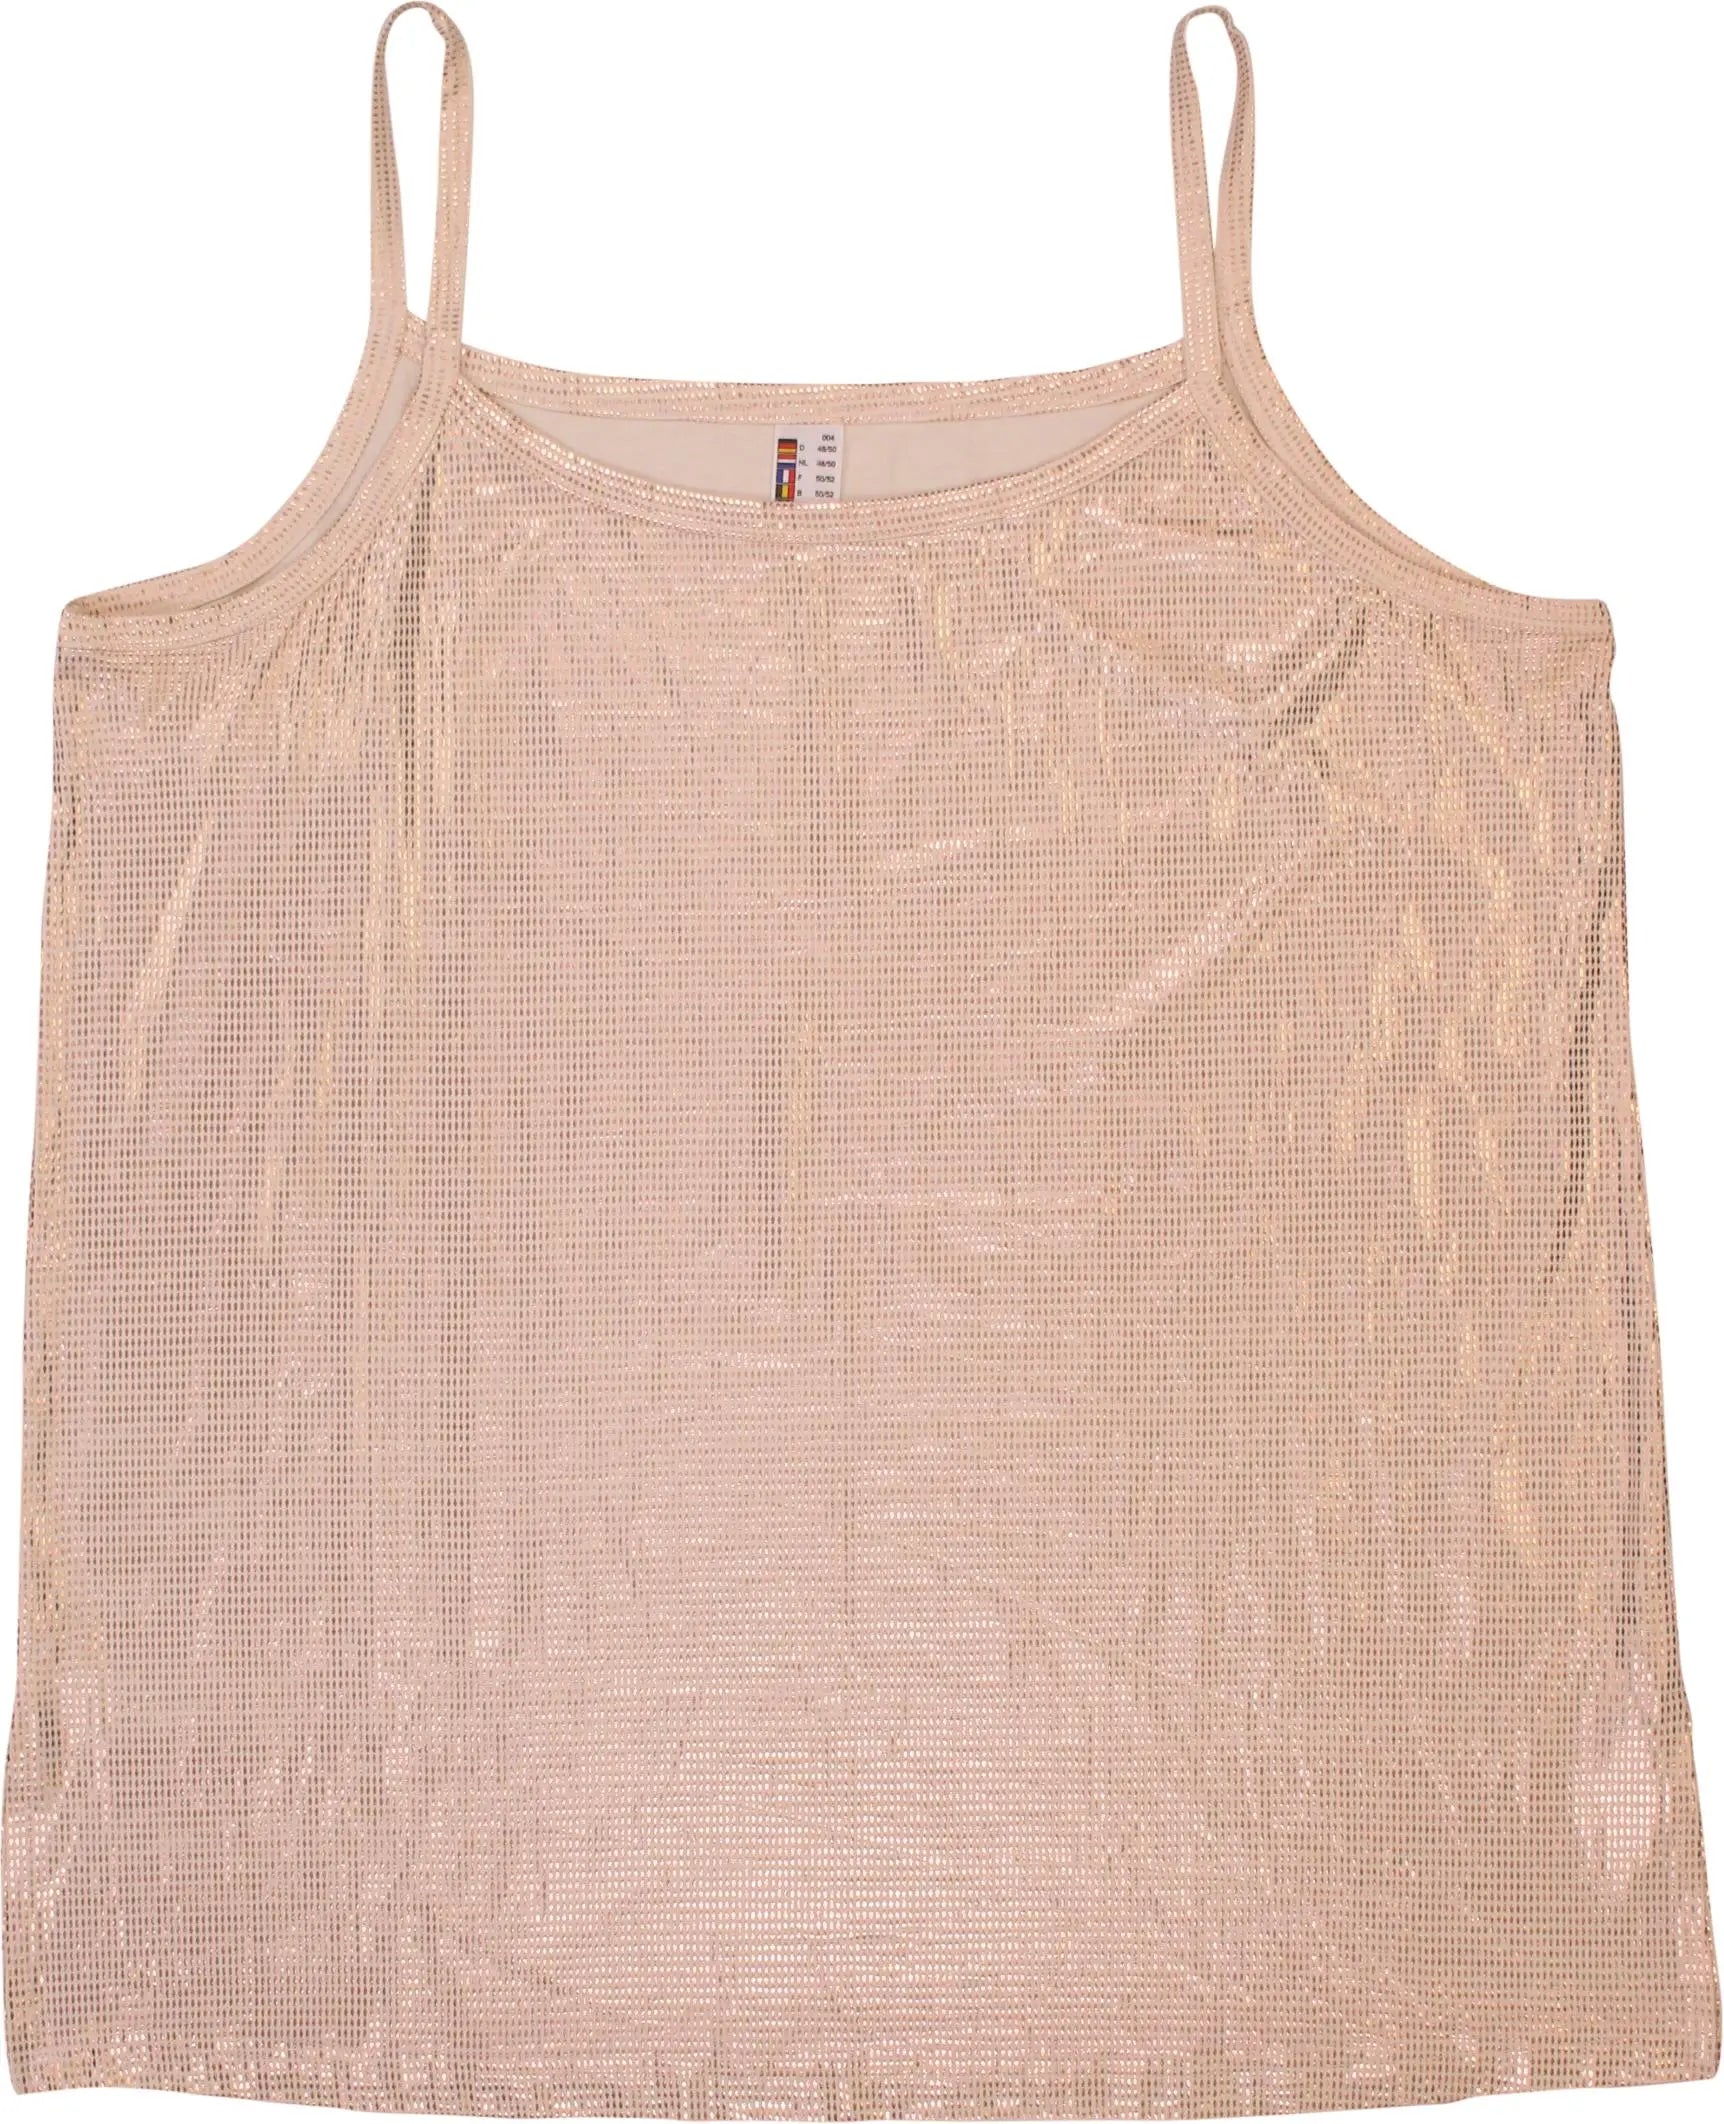 Unknown - Metallic Gold Top- ThriftTale.com - Vintage and second handclothing